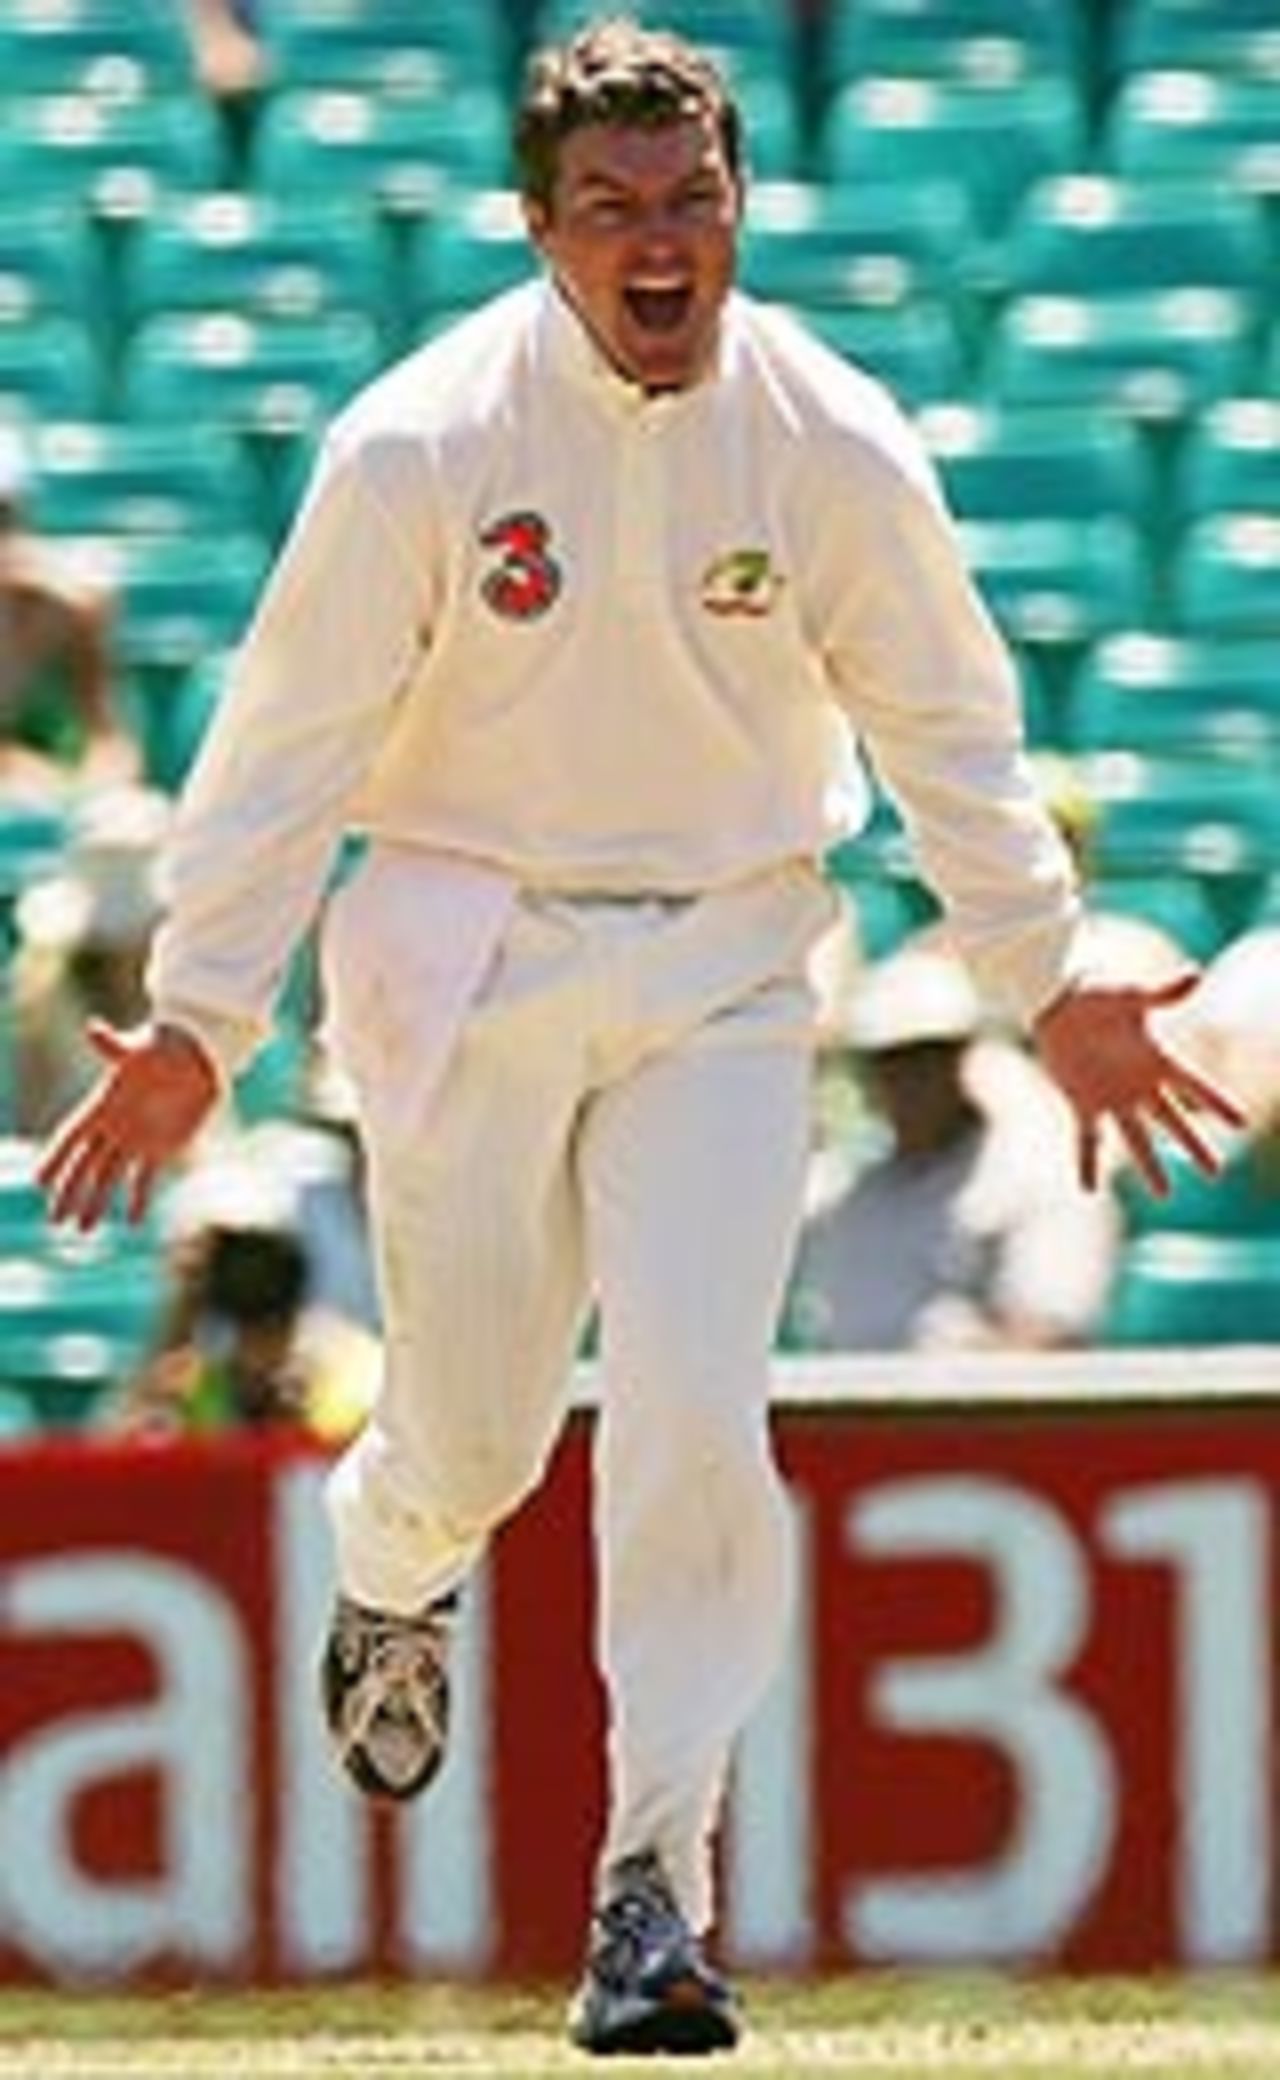 Stuart MacGill is overjoyed with yet another wicket at Sydney, Australia v Pakistan, 3rd Test, Sydney, January 5, 2005